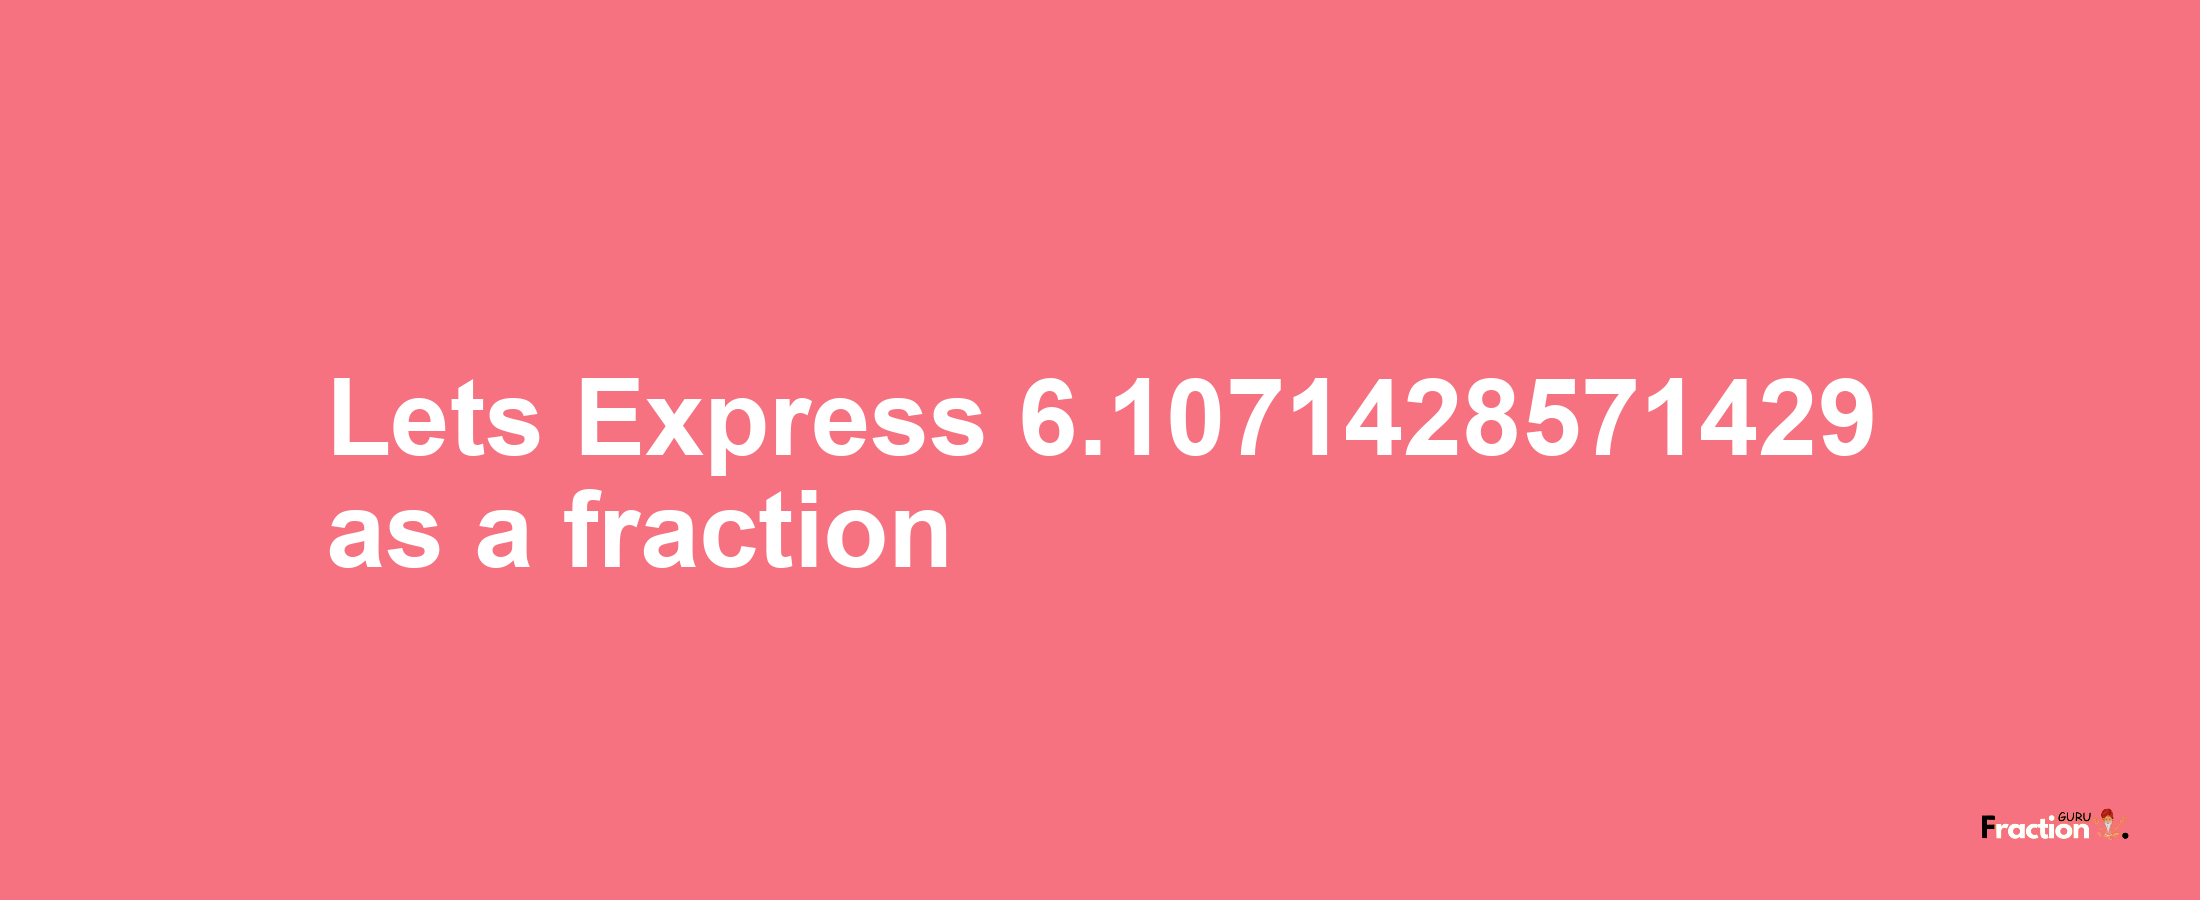 Lets Express 6.1071428571429 as afraction